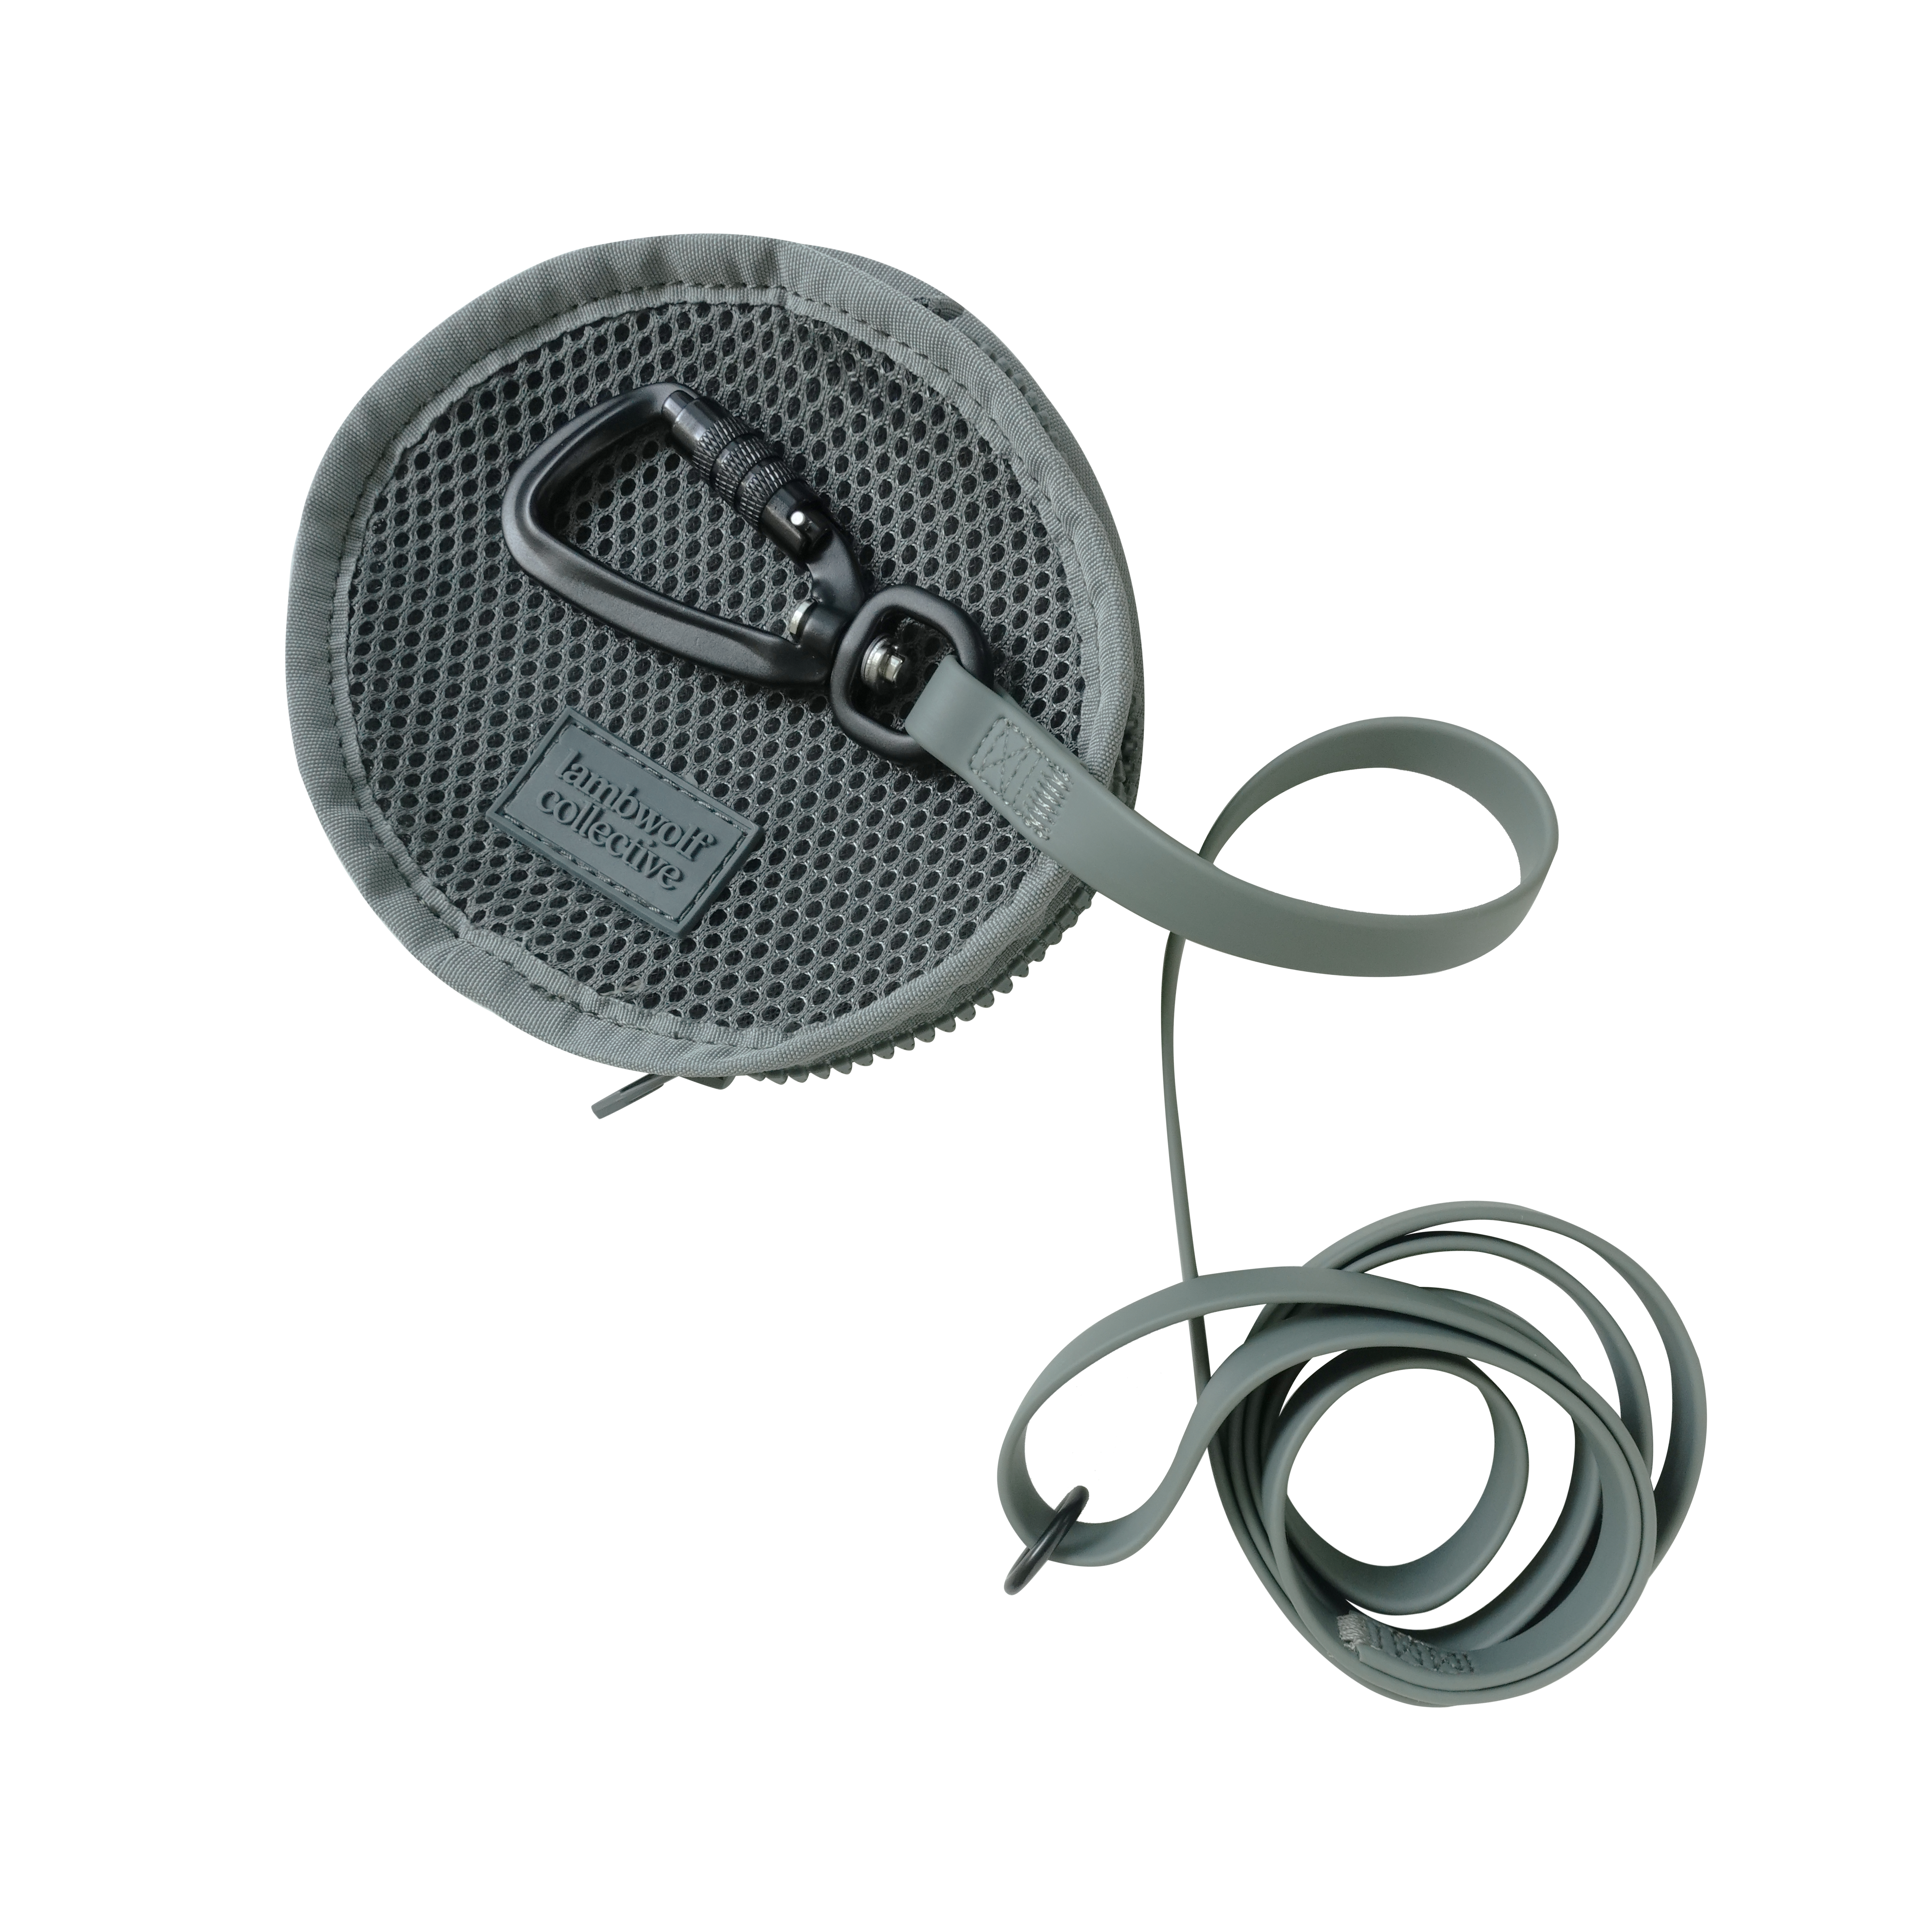 APEX Tide is a waterproof long skinny leash designed with ultralight and minimal hardware to be as compact as possible. 